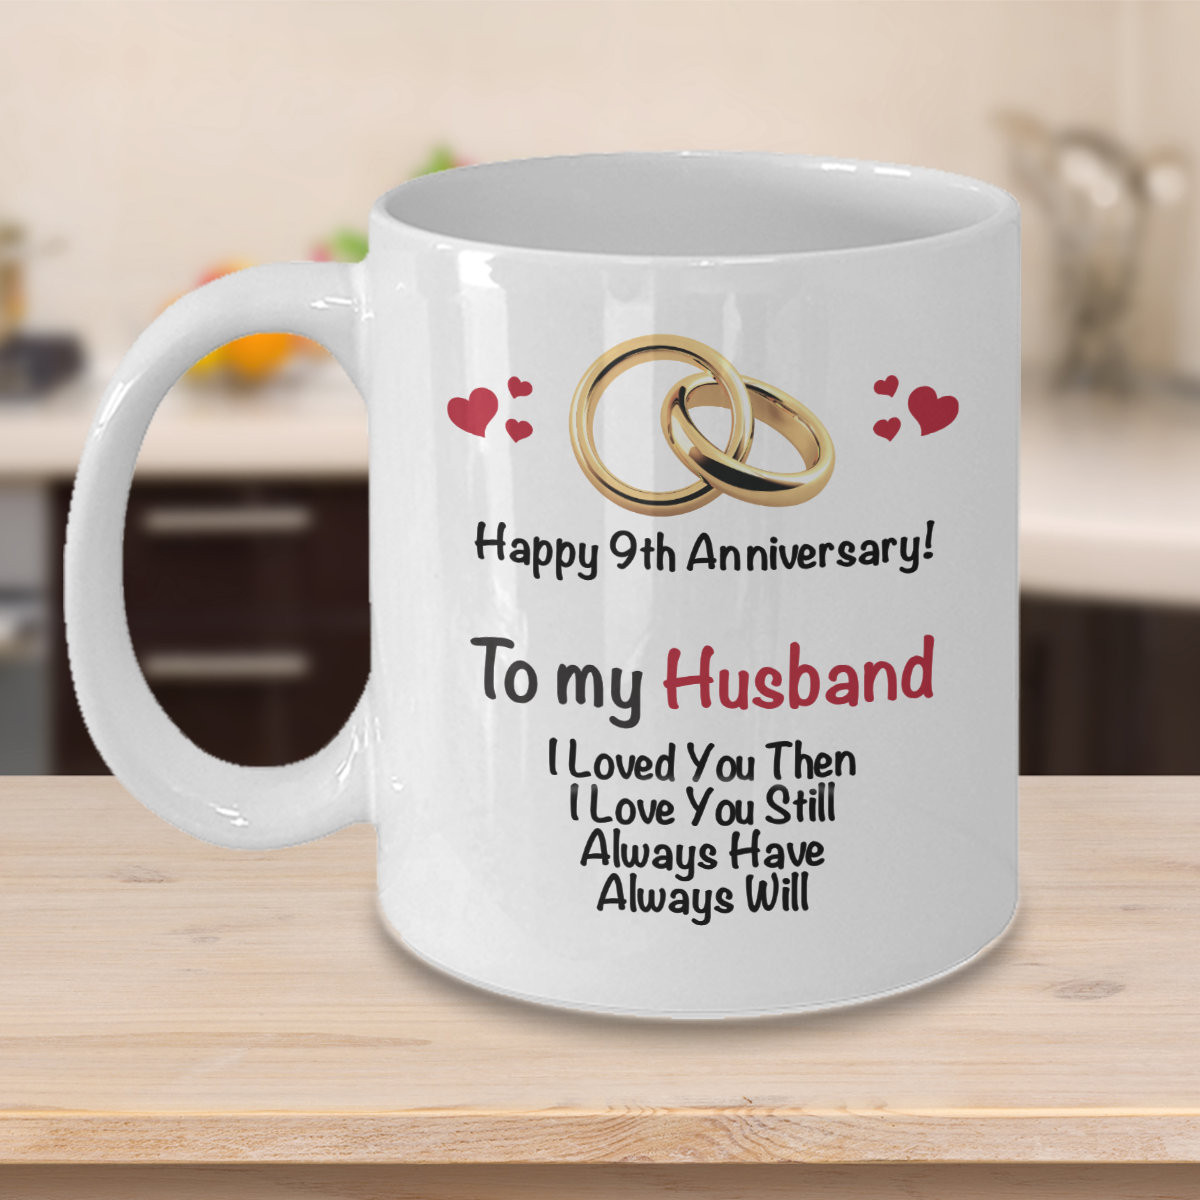 Wedding Gift Ideas For Husband
 9th Anniversary Gift Ideas for Husband 9th Wedding